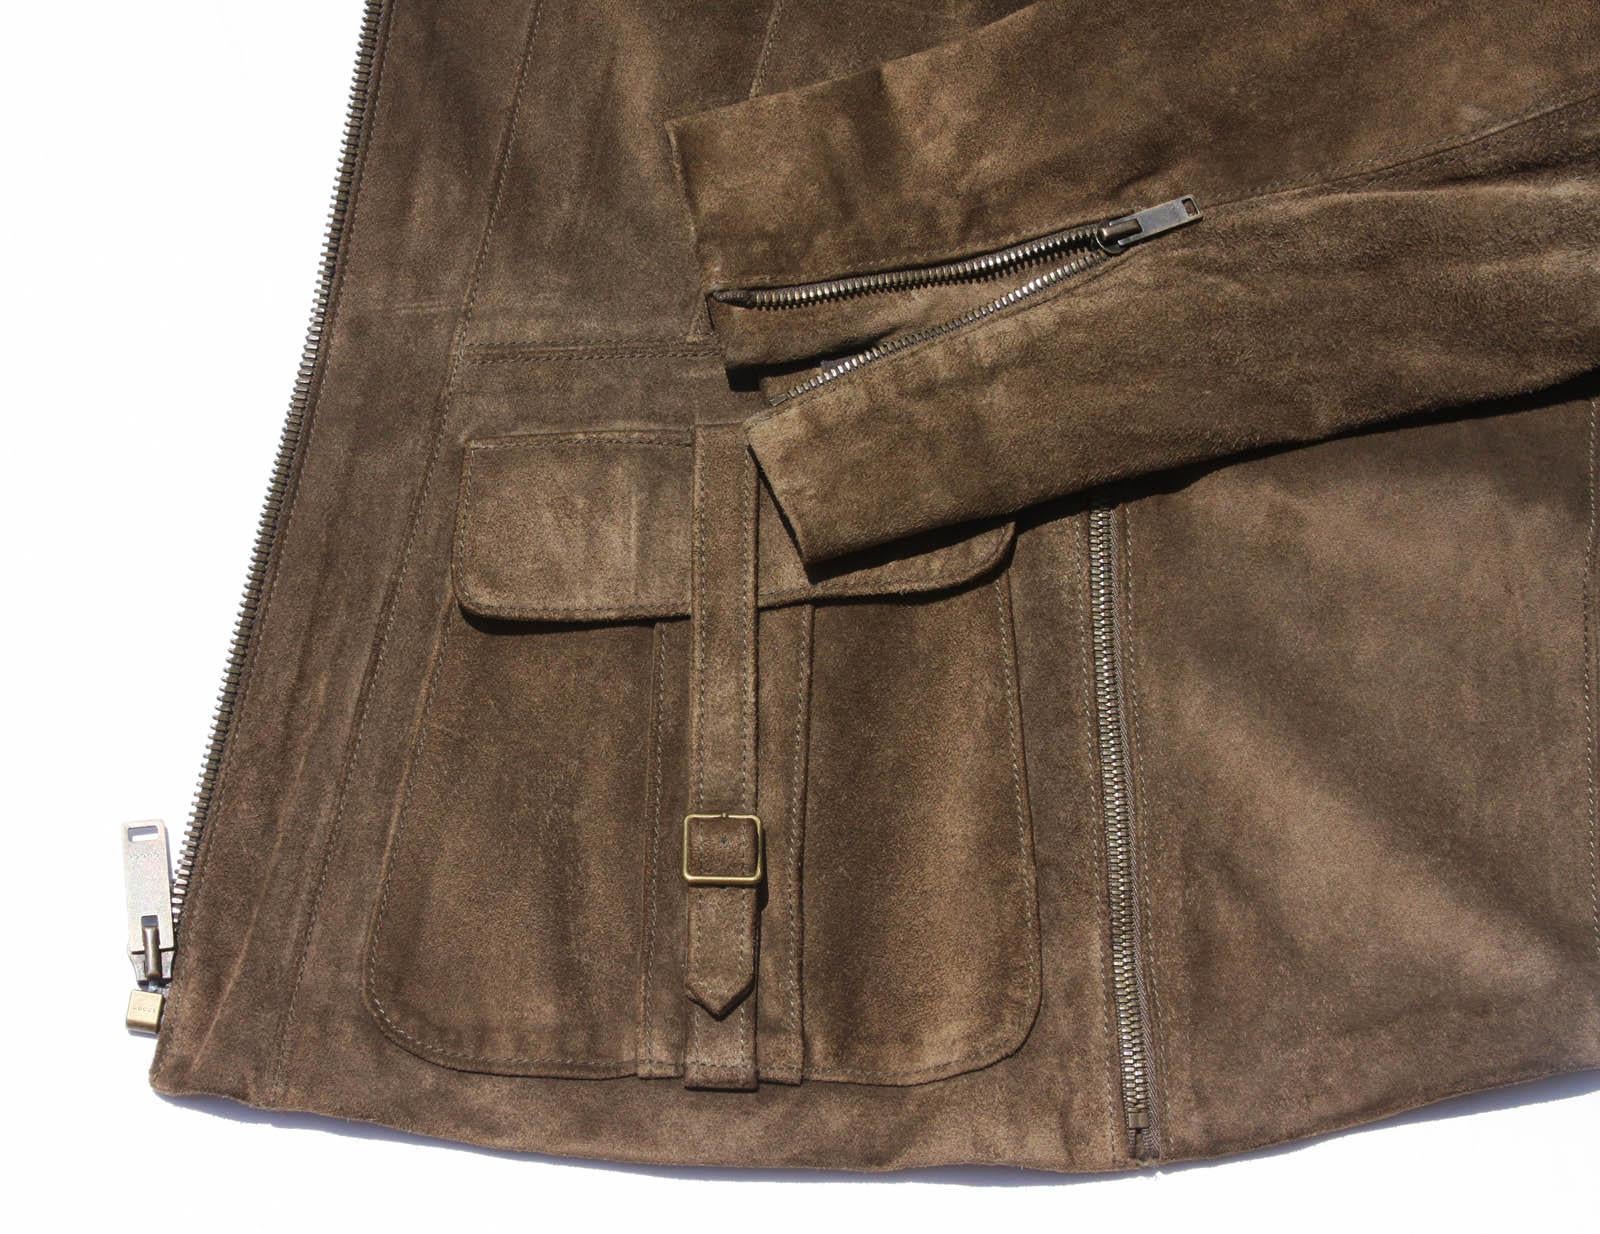 Tom Ford for Gucci Men's Runway Leather Western Jacket, S / S 2004  3